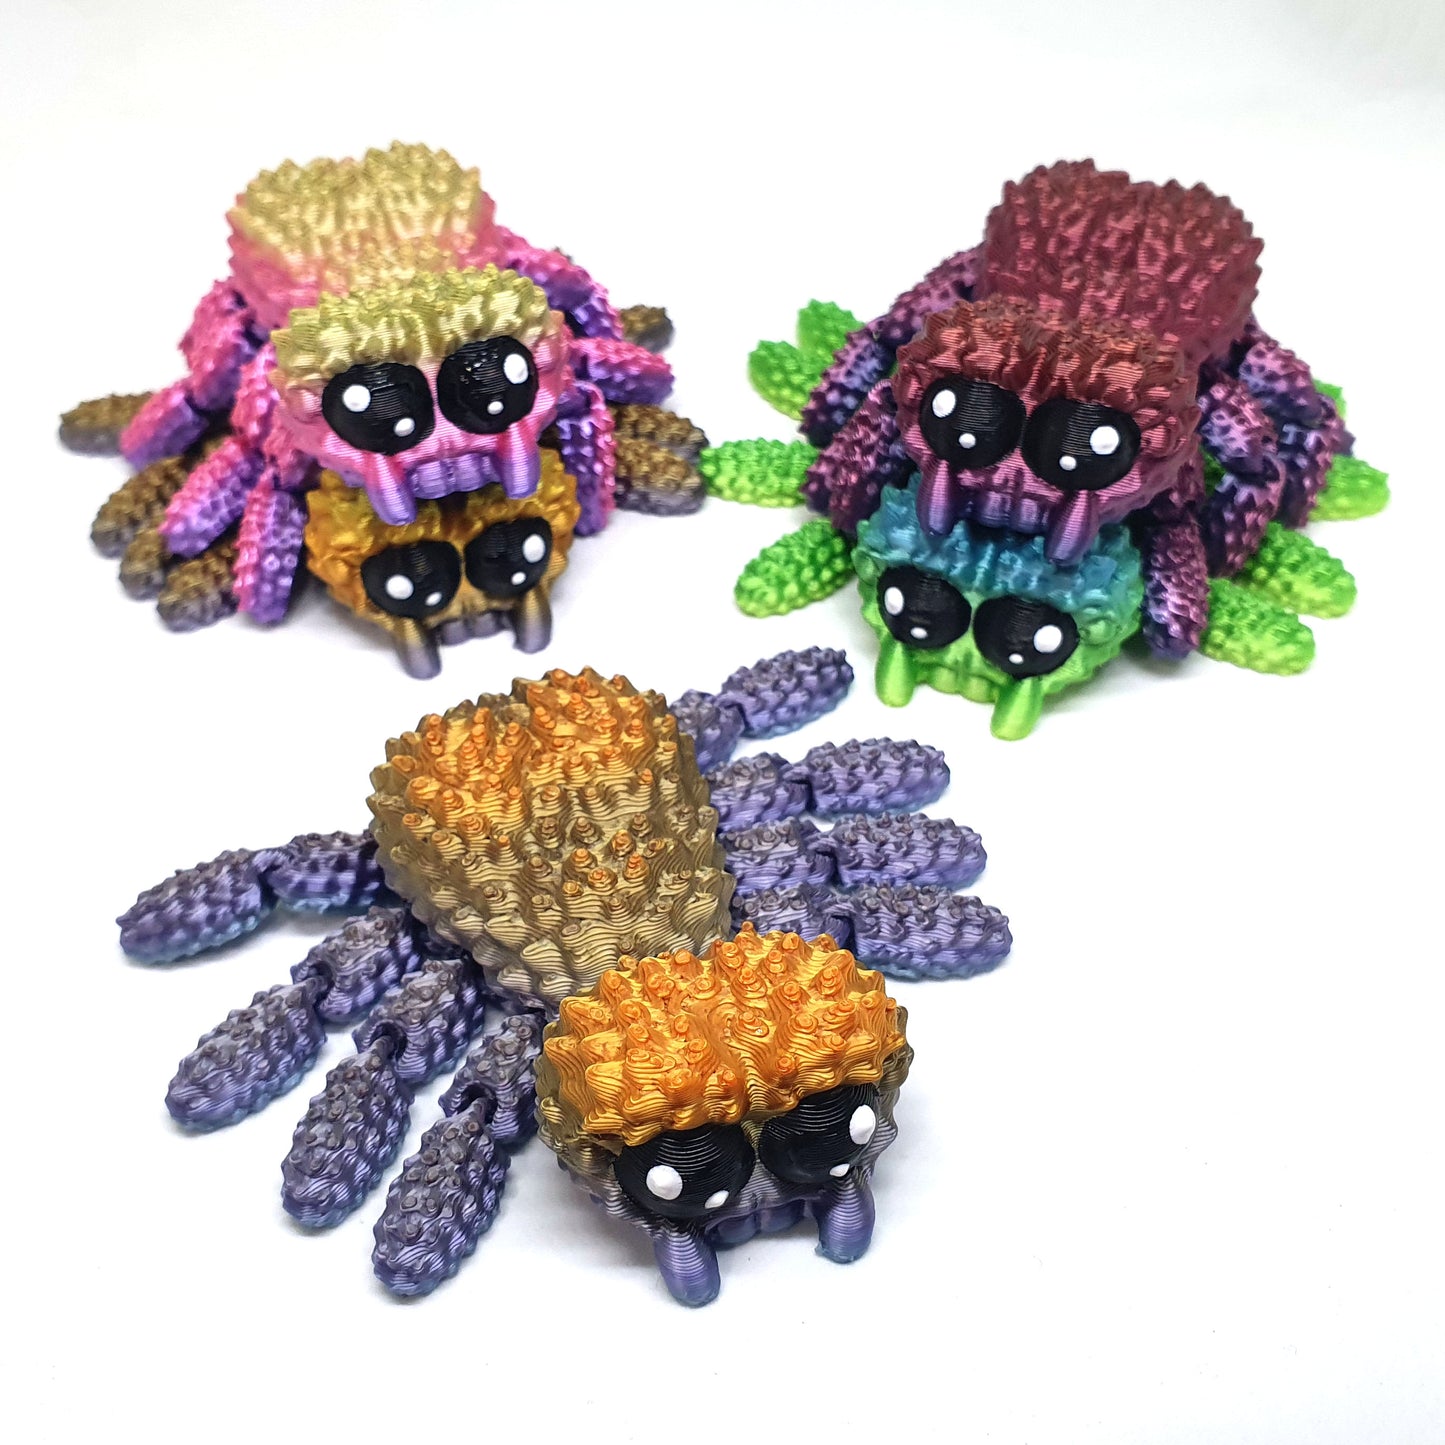 Cute Articulated Spooky Spider Blind Bag